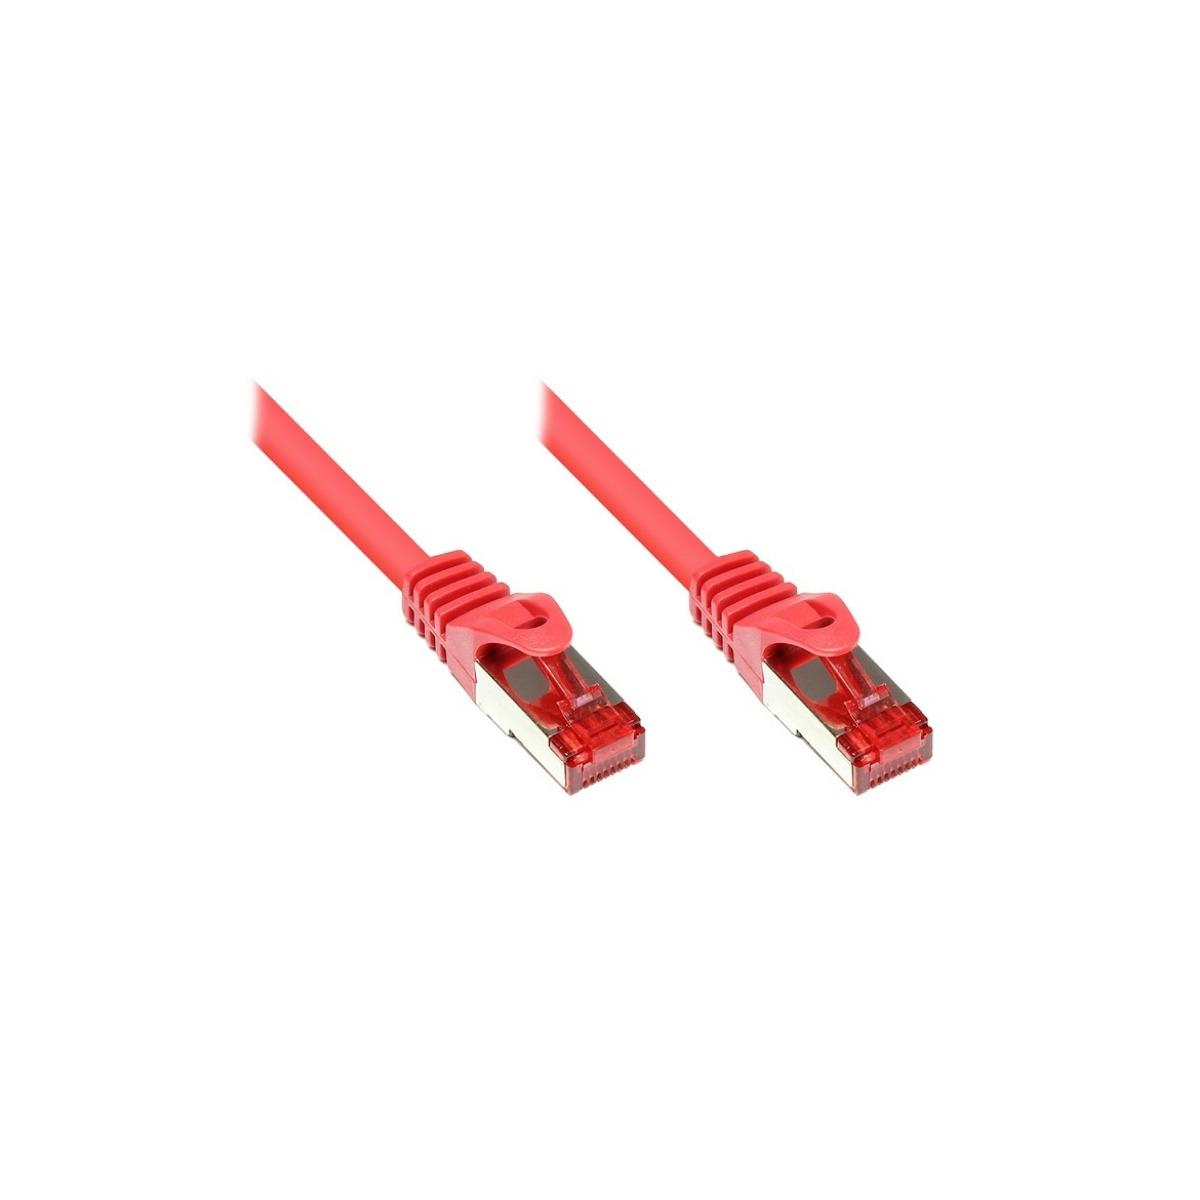 VARIA GROUP SO-31239 Patchkabel Cat.6, Rot